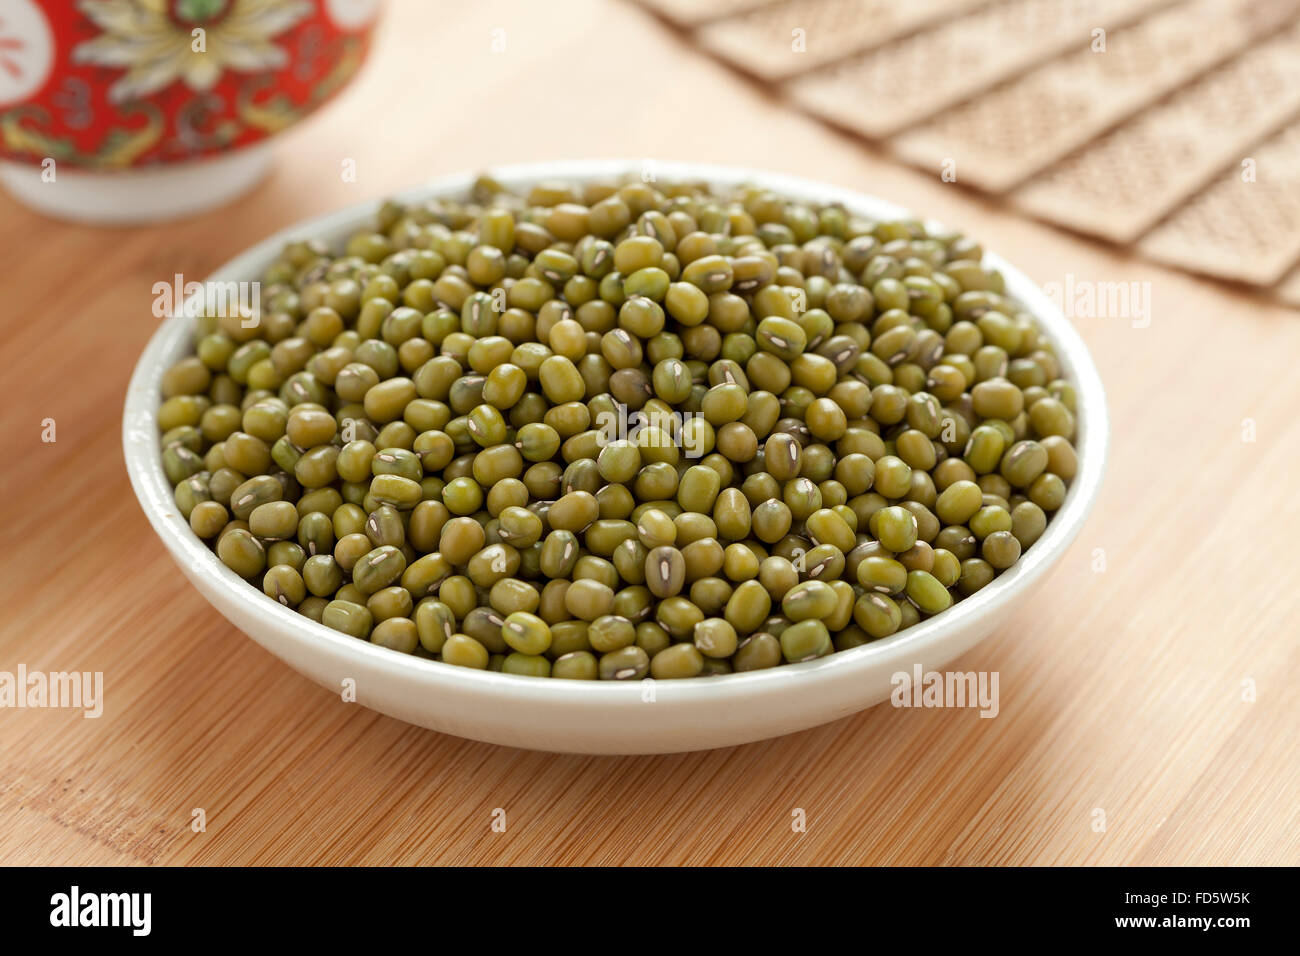 Bowl with dried Mung beans on the table Stock Photo